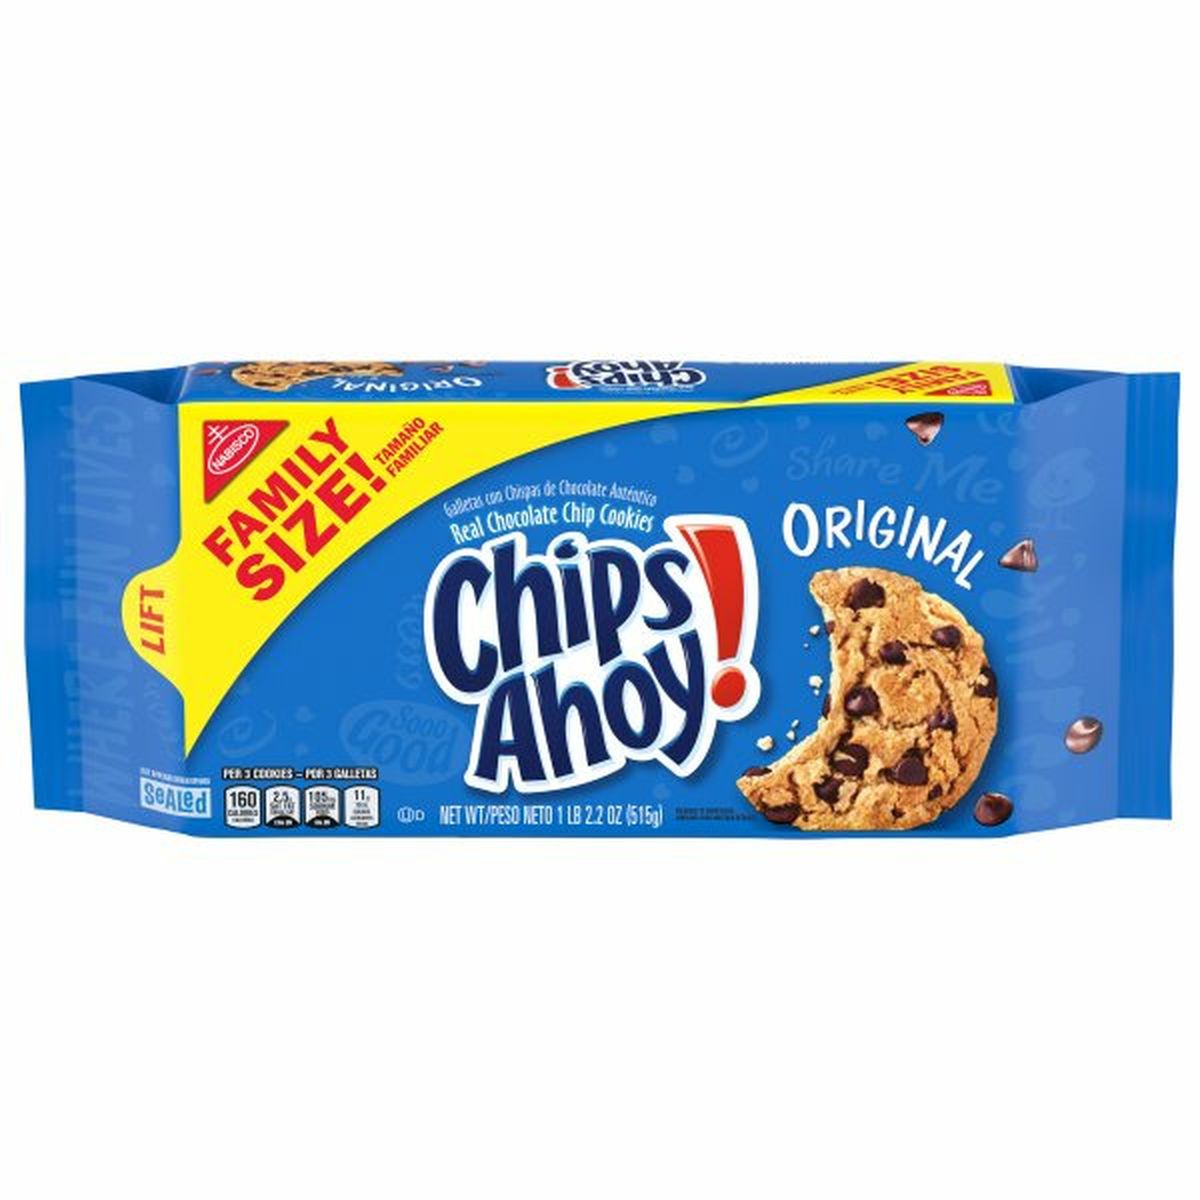 Calories in Chips Ahoy! Cookies, Original, Family Size!